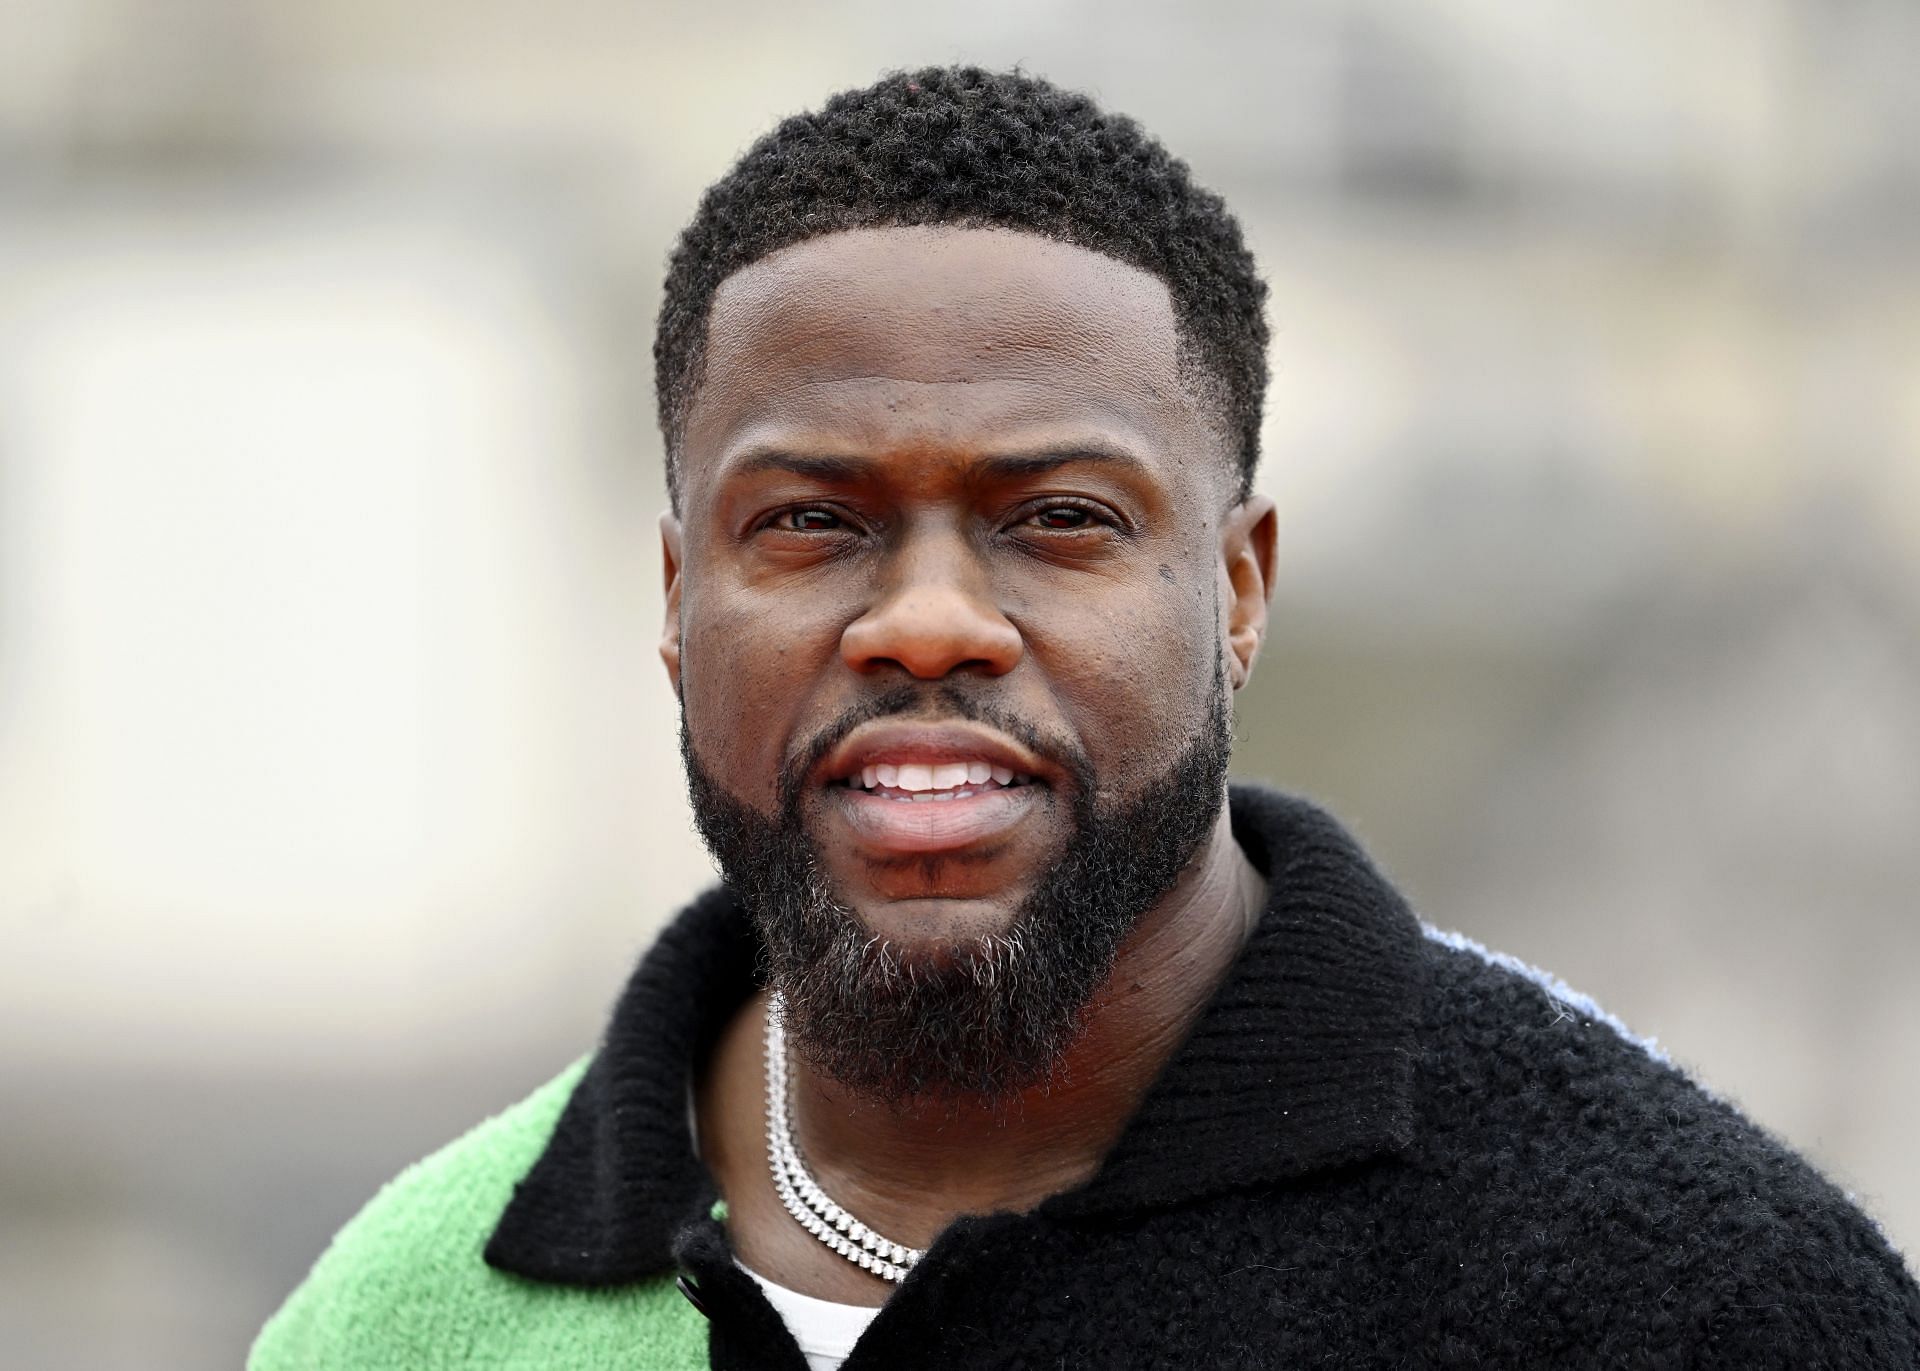 Kevin Hart to host The Greatest Roast of All time (Image via Getty/Gareth Cattermole)